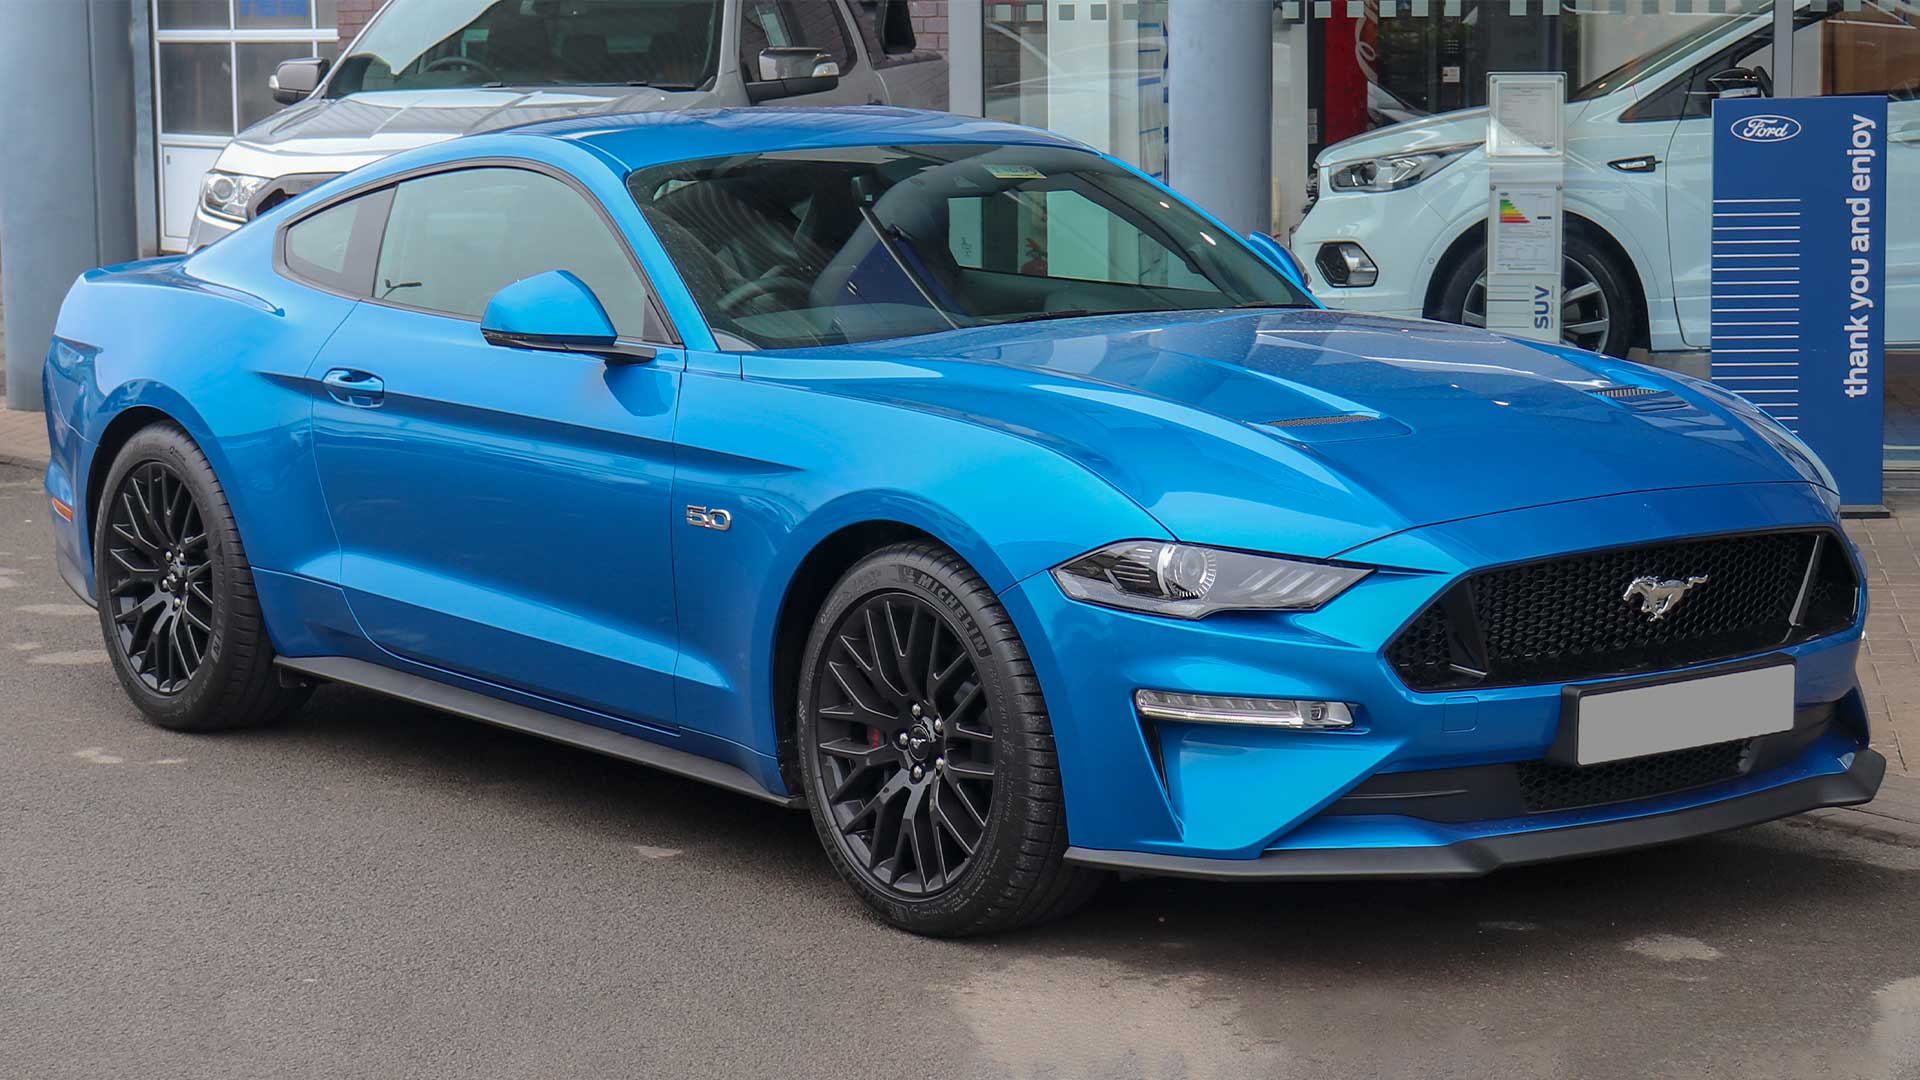 Image of a model year 2015 to 2017 Ford Mustang